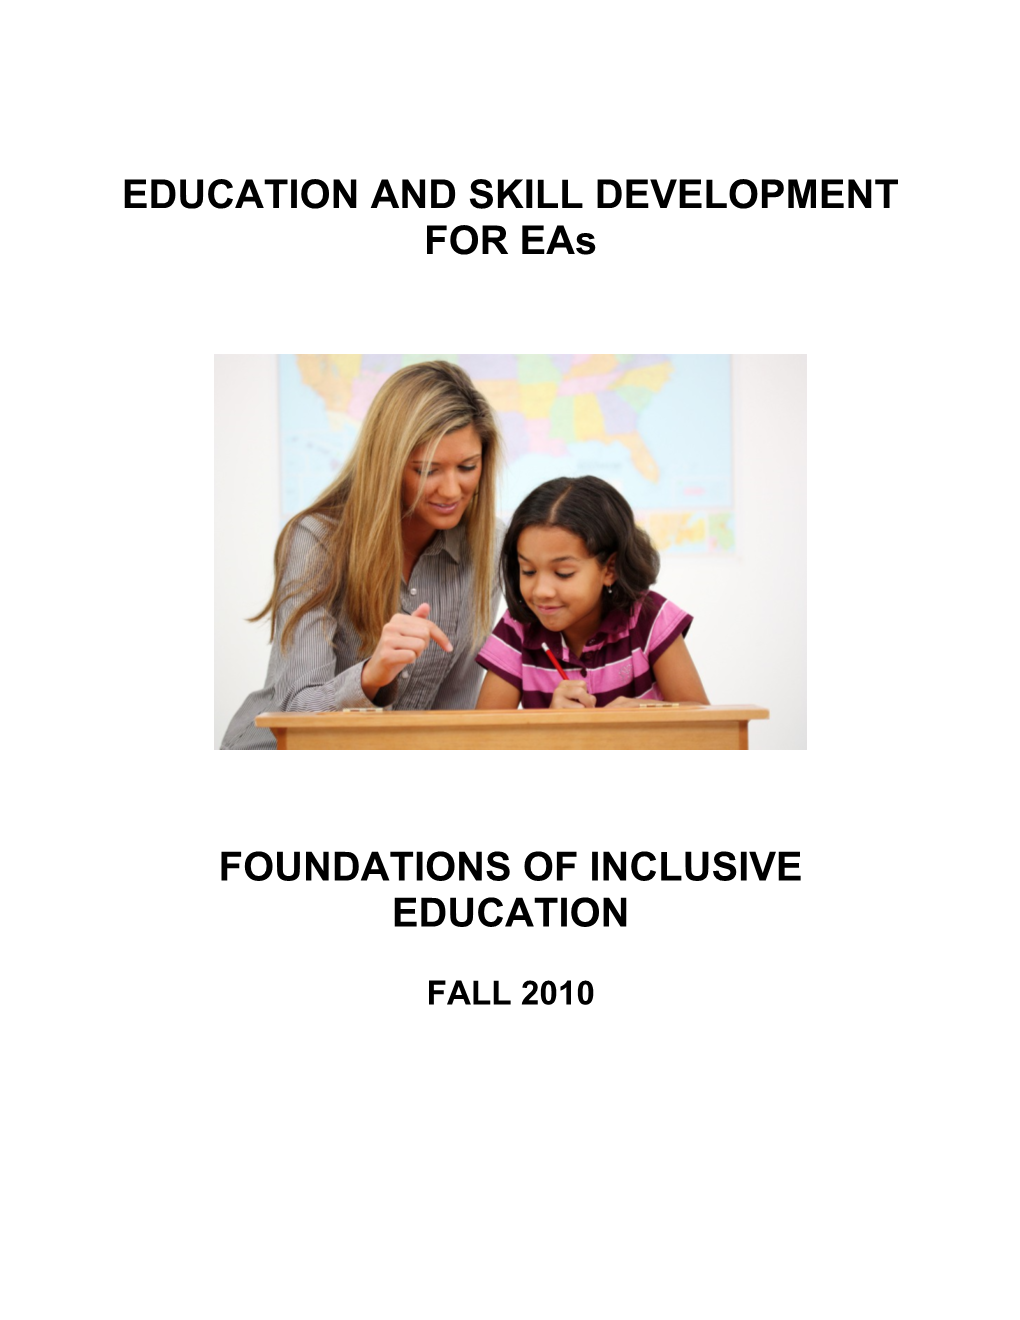 Foundations of Inclusive Education